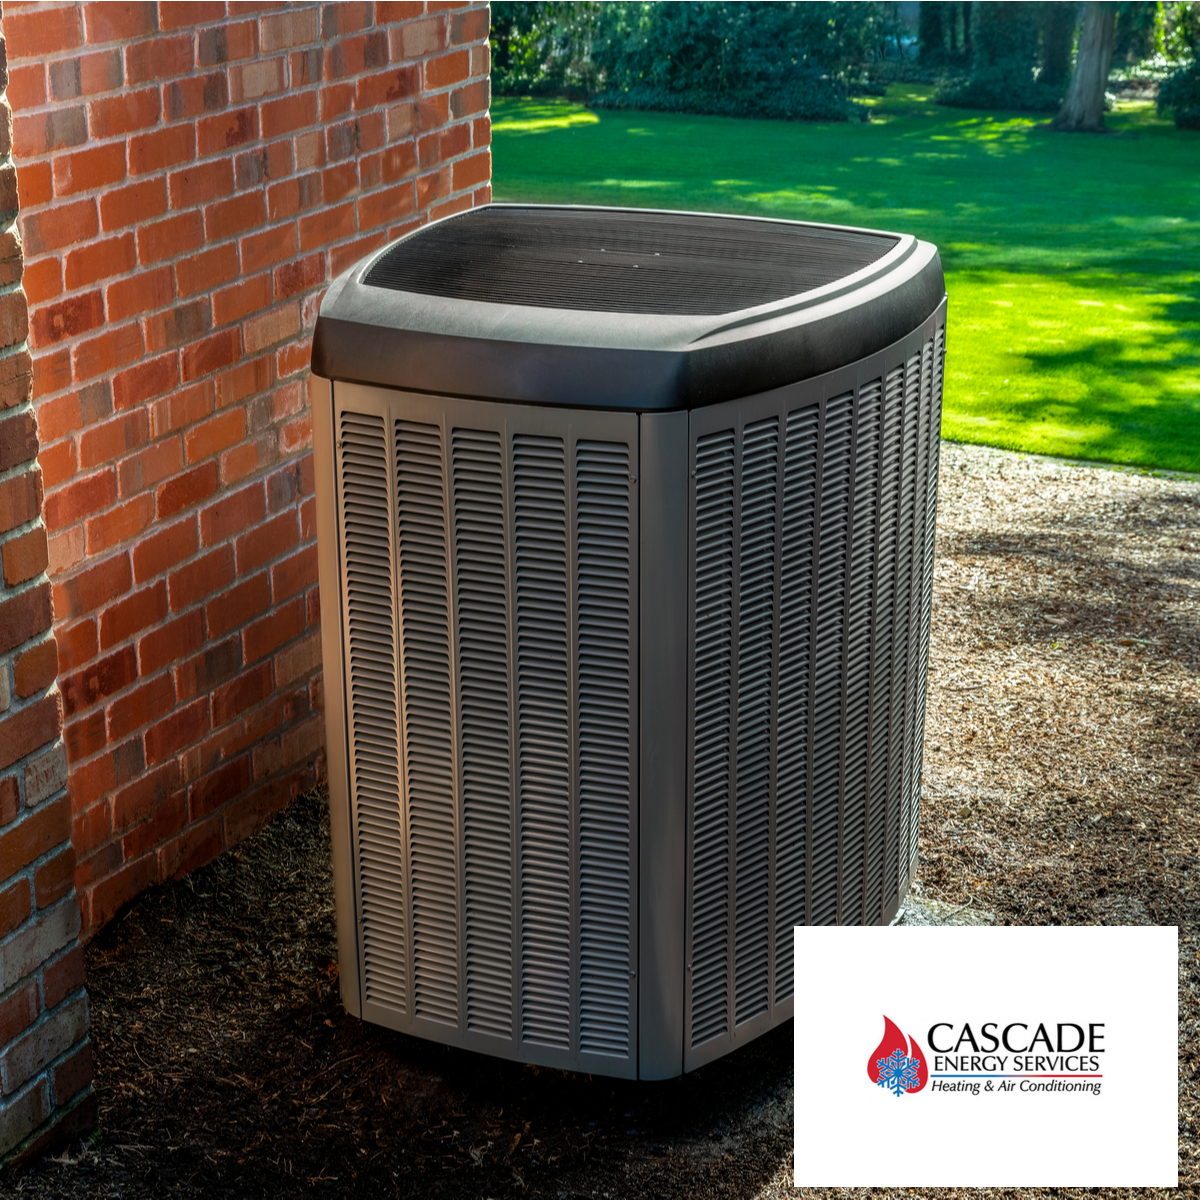 Heat Pump Tune-up and Preventative Maintenance Can Save You Money